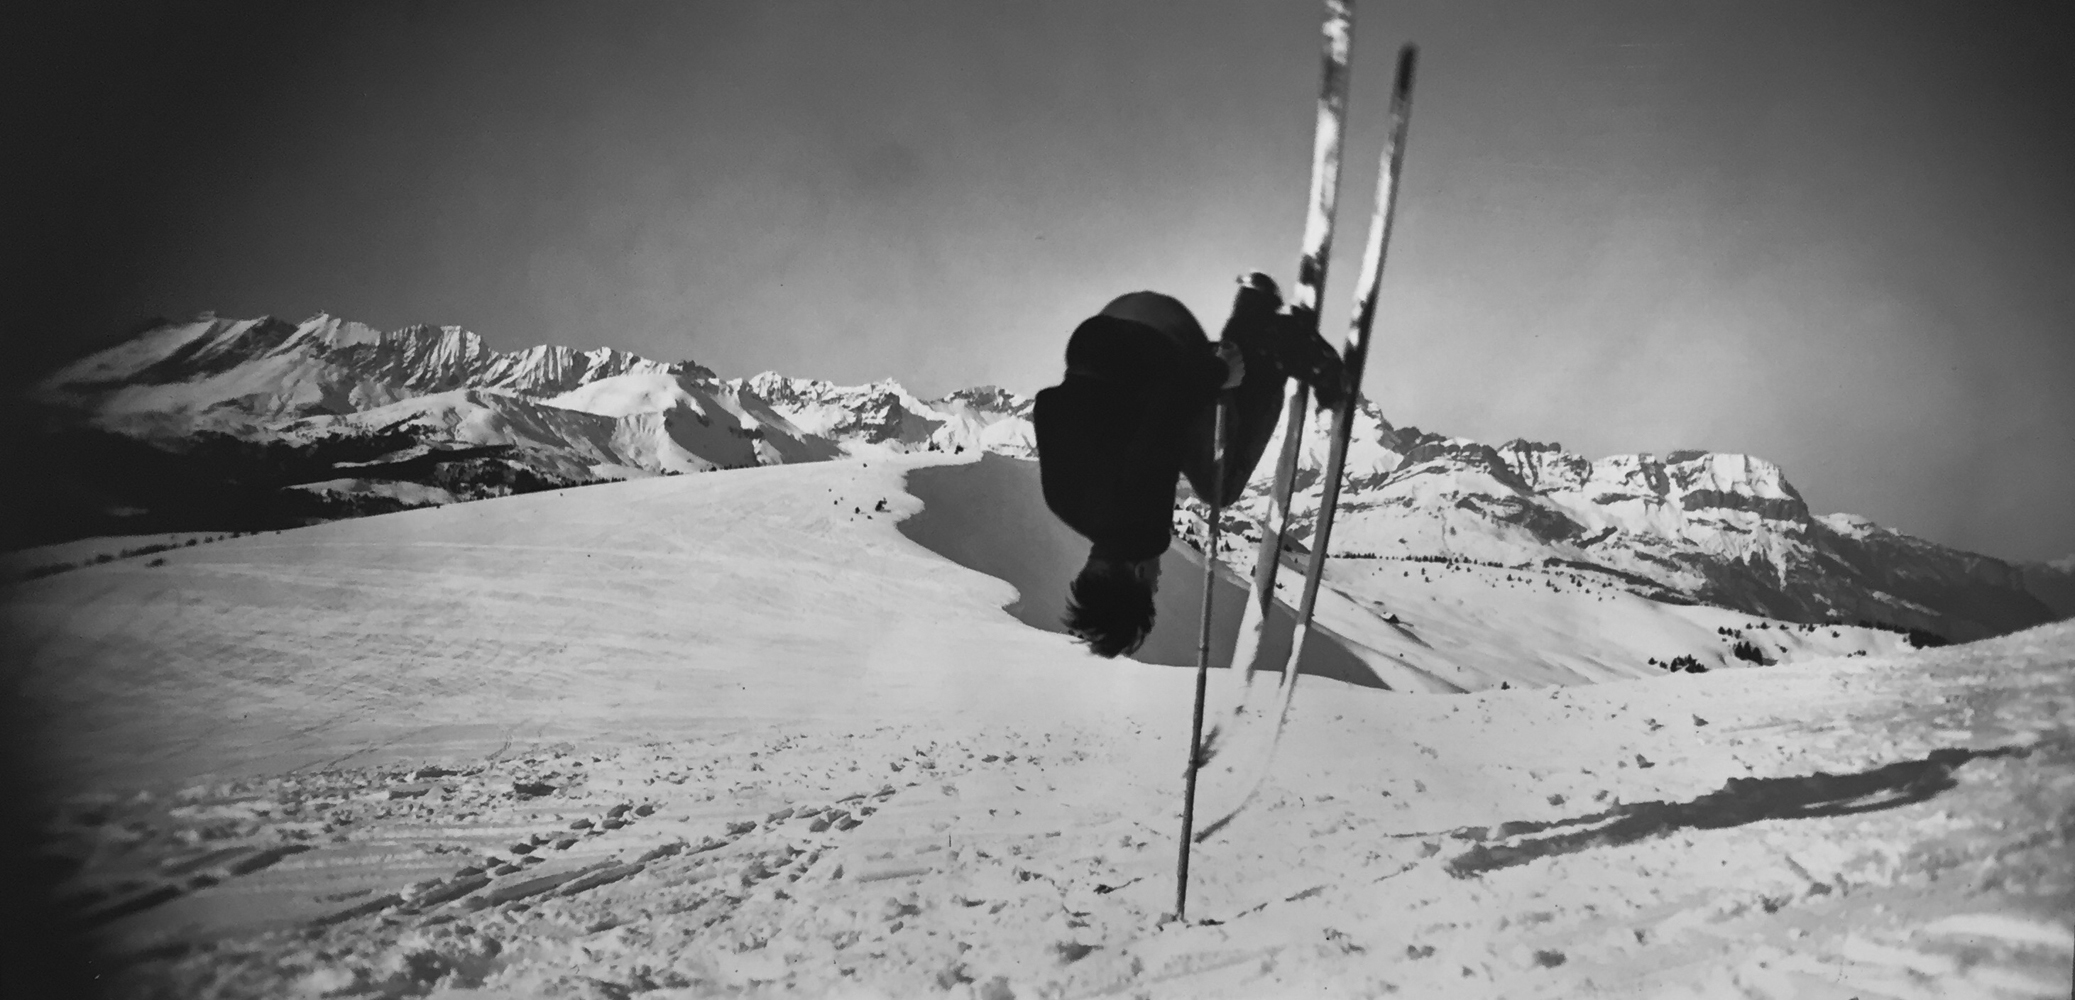 Jacques-Henri Lartigue, Megeve, January, 1930, gelatin silver print, 12 x 16 inches, with JHL blind stamp in margin